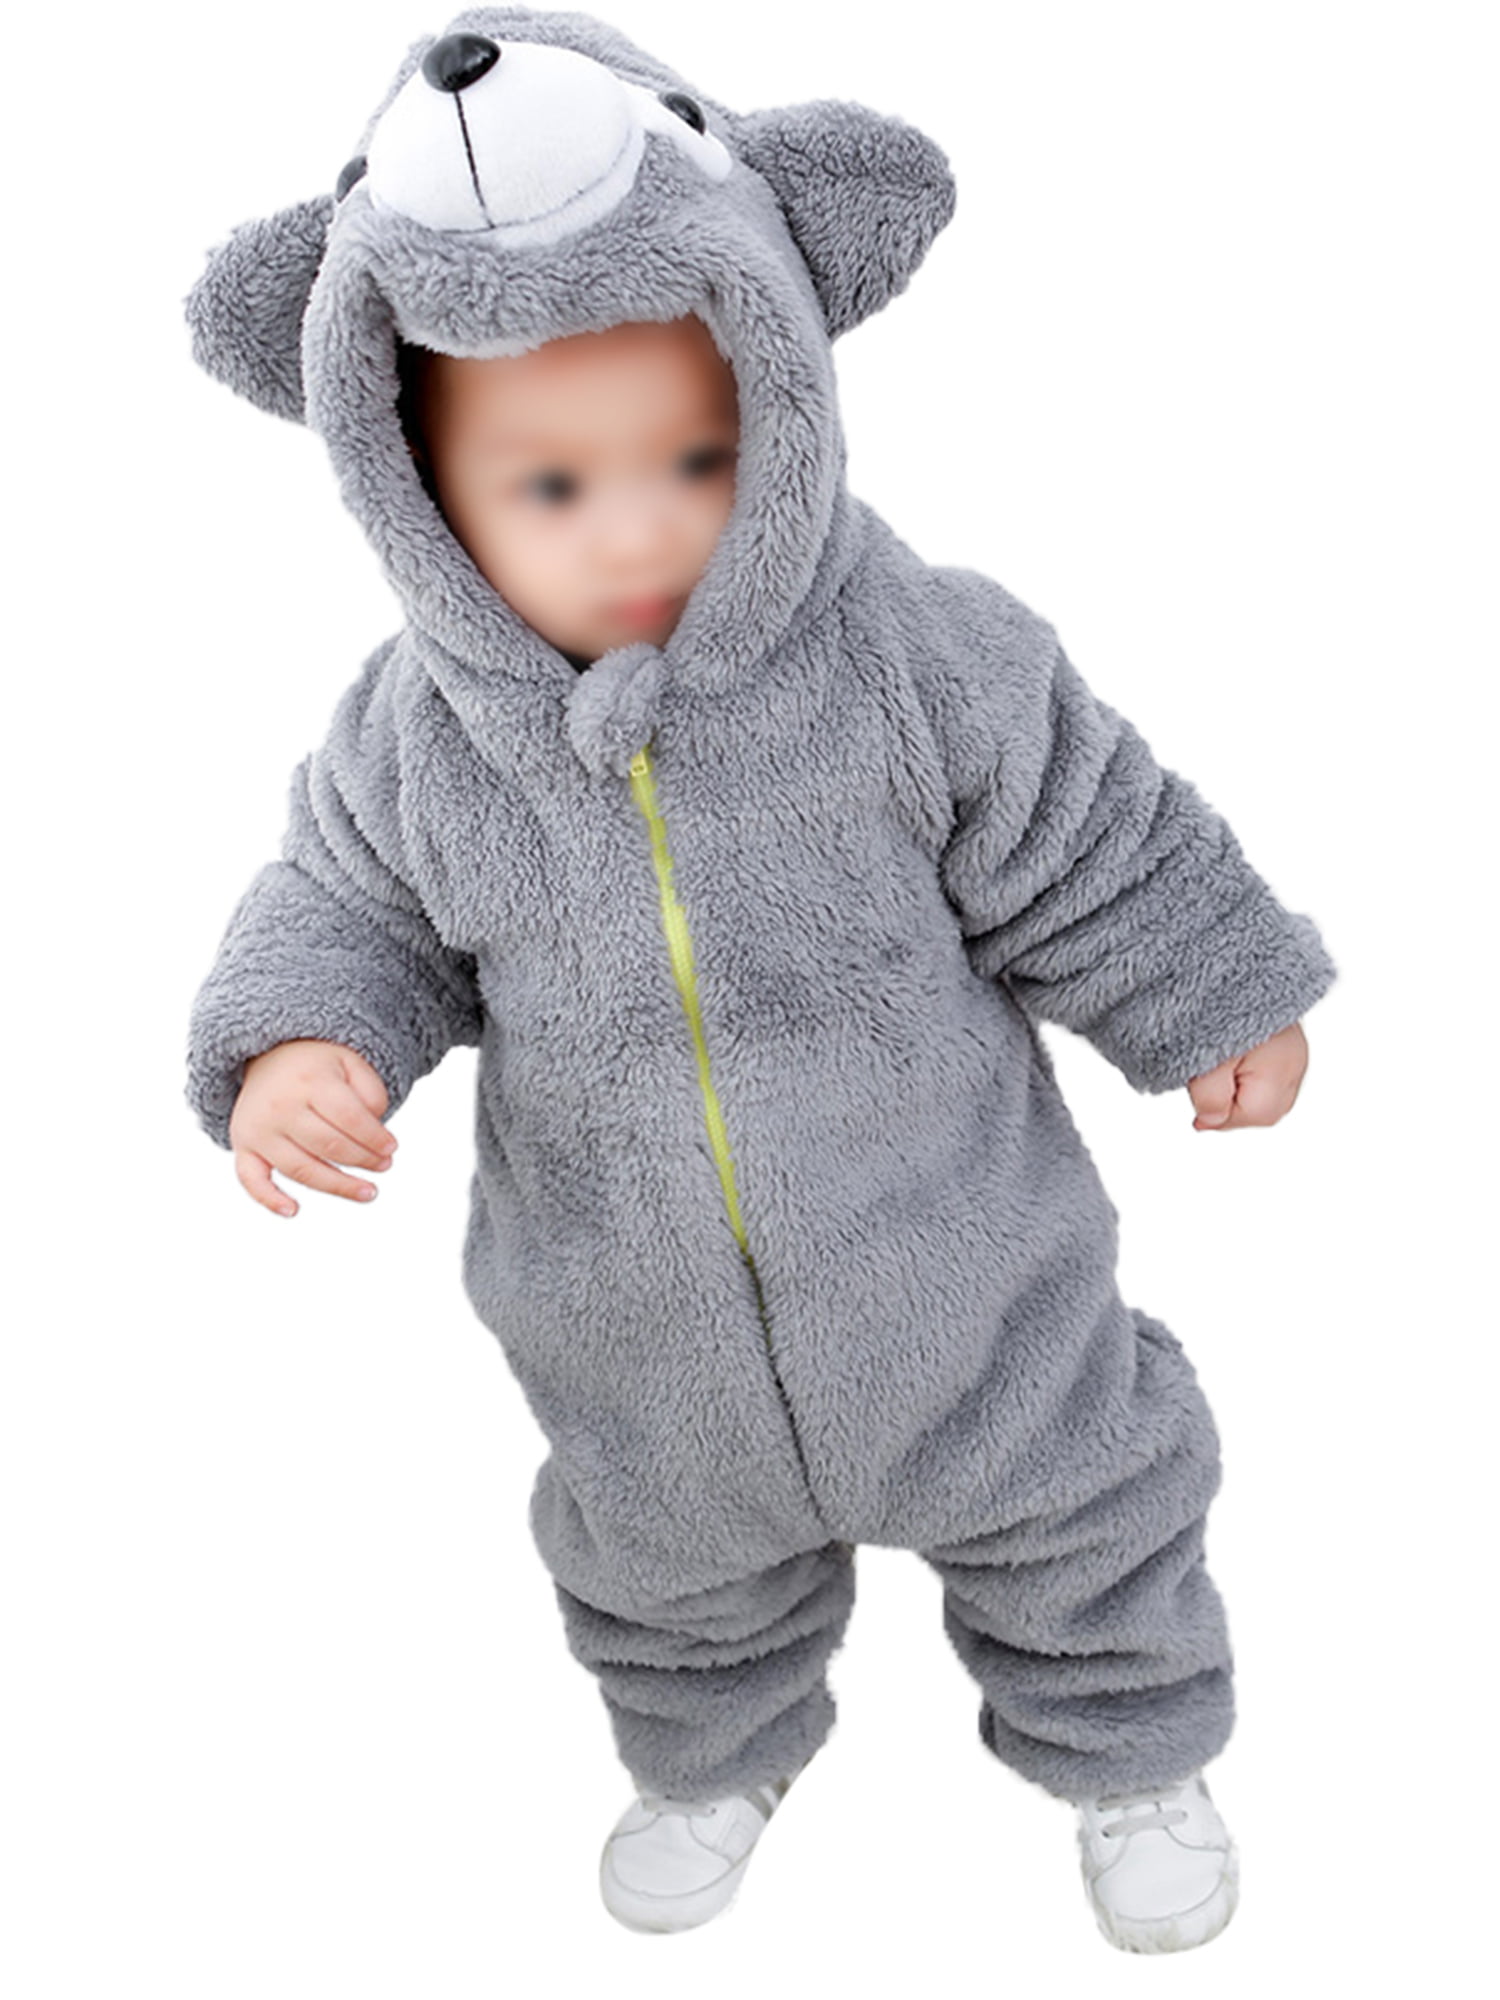 Toddler Baby Boy Long Sleeve Hoodies Jumpsuit Romper Big Little Brother Autumn Winter Family Outfits 